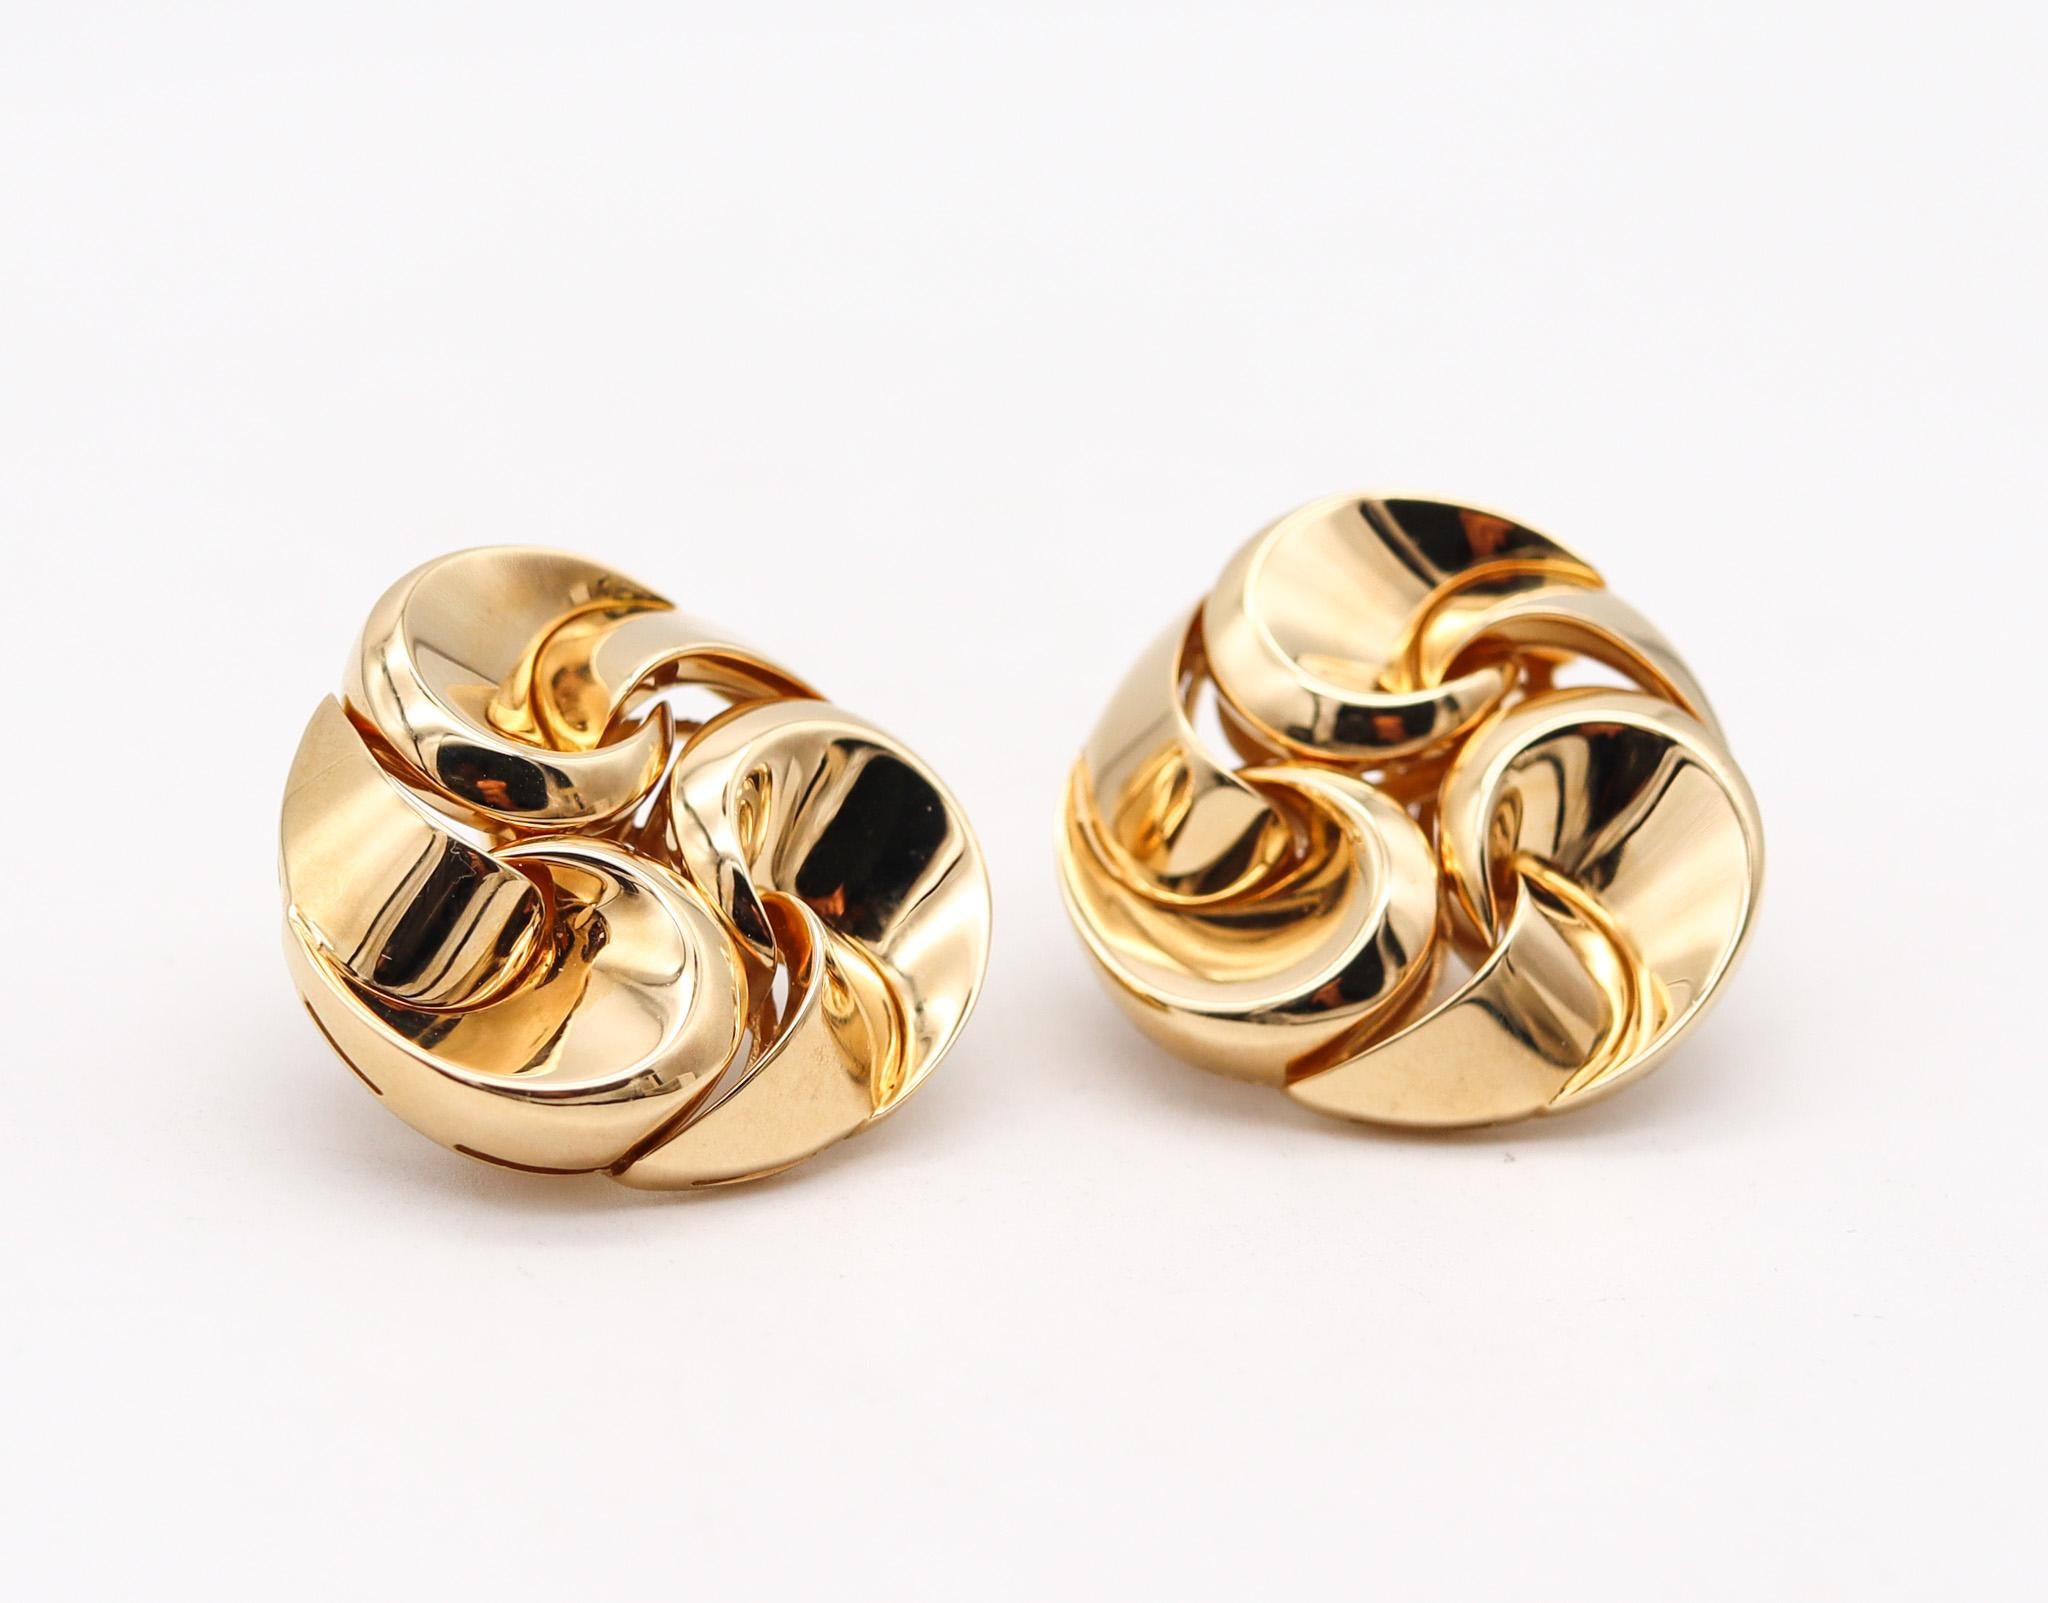 Swirl Vertigo earrings designed by Marina B.

Beautiful swirl pair of ear clips created in Milano Italy by the jewelry house of Marina Bvlgari. back in the 1990's. These free-form geometric earrings are part of the iconic collection named Vertigo.